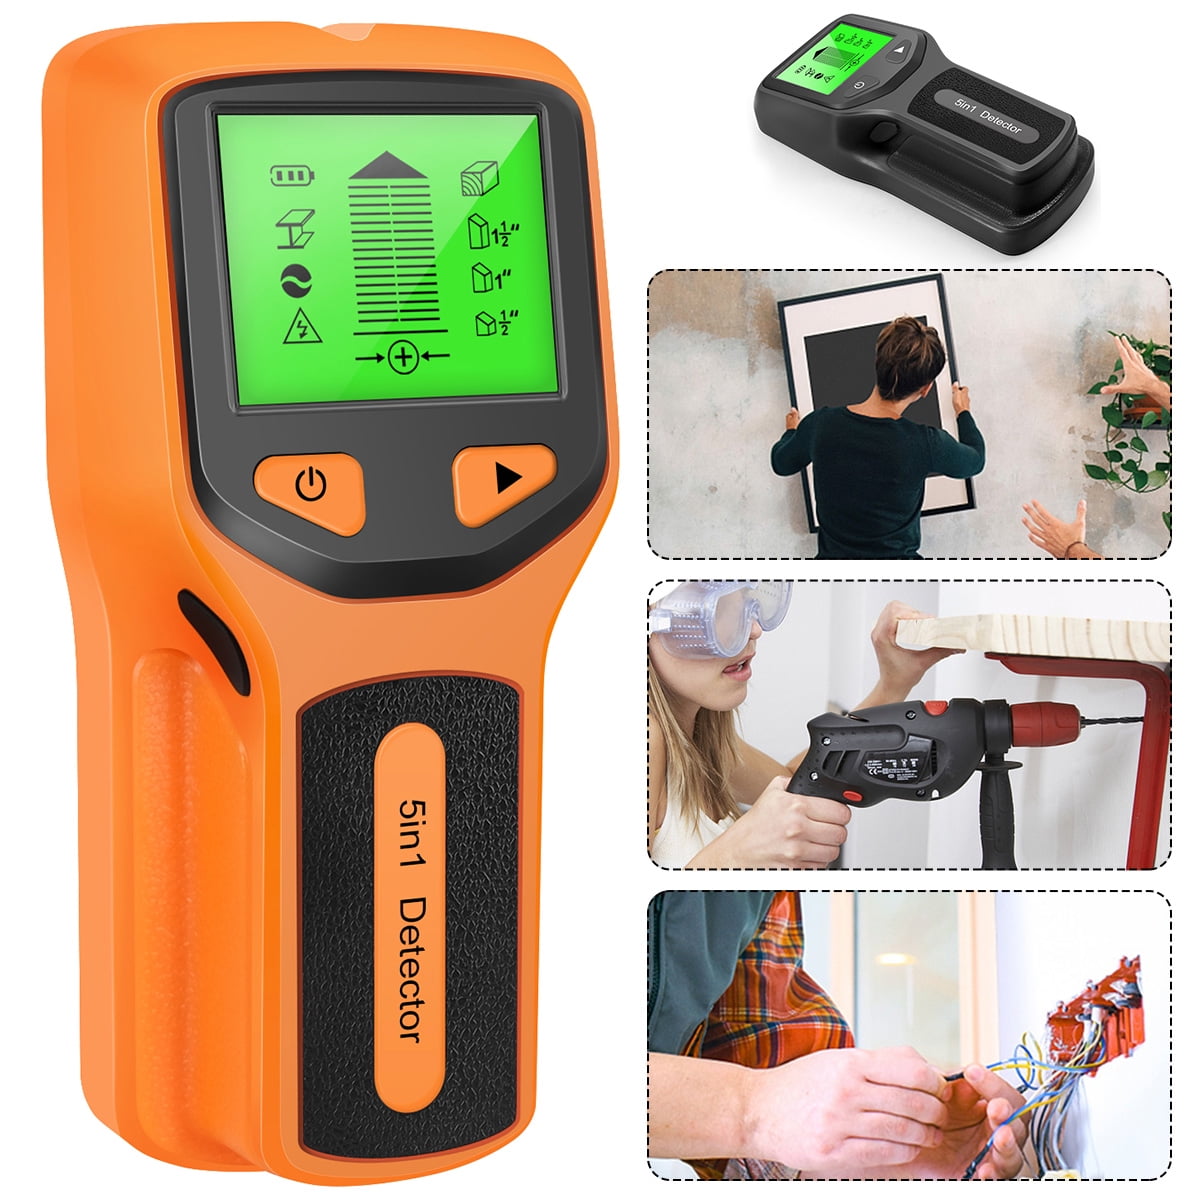 SUNTUTUFY Stud Finder Wall Scanner - 5 in 1 Electronic Stud Detector with Upgraded Smart Sensor, Audio Alarm and HD LCD Display for The C